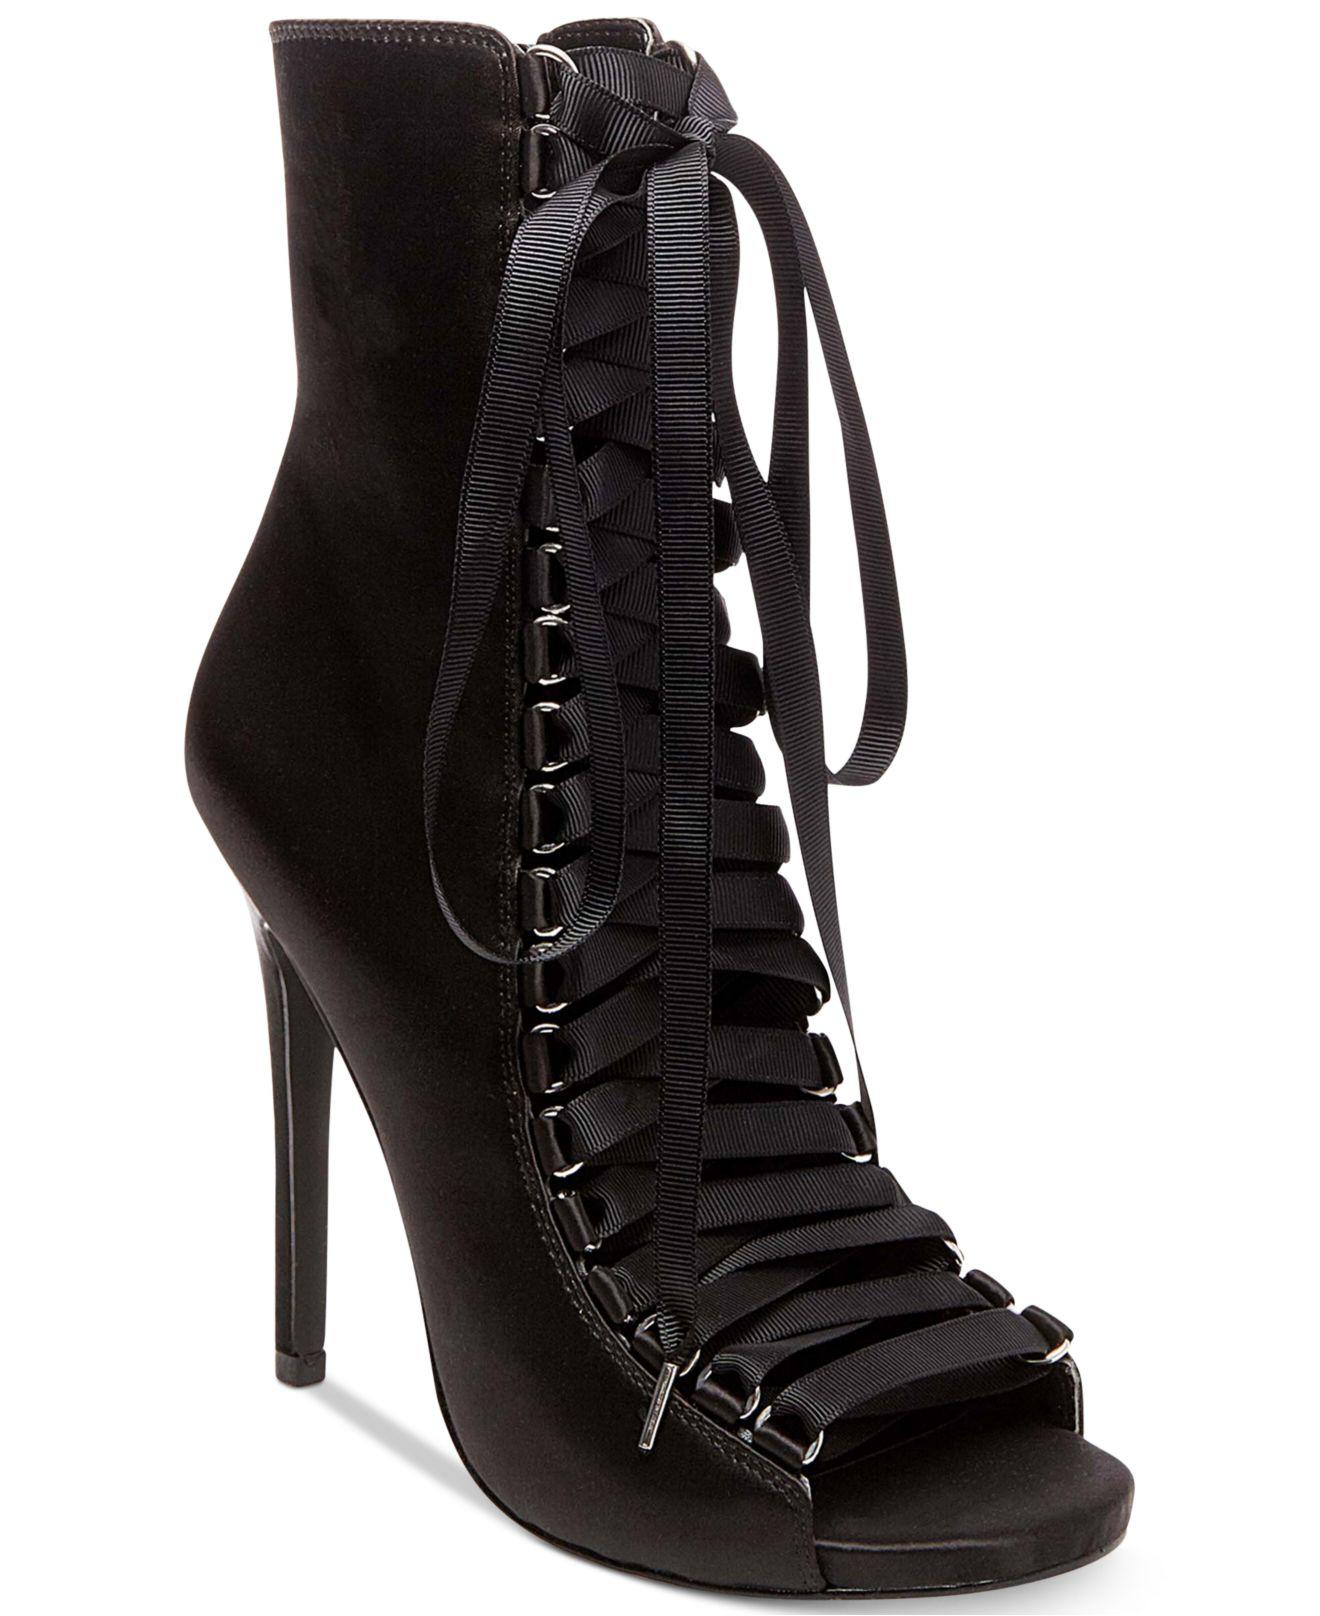 Lyst - Steve Madden Fuego Lace-up Peep-toe Booties in Black